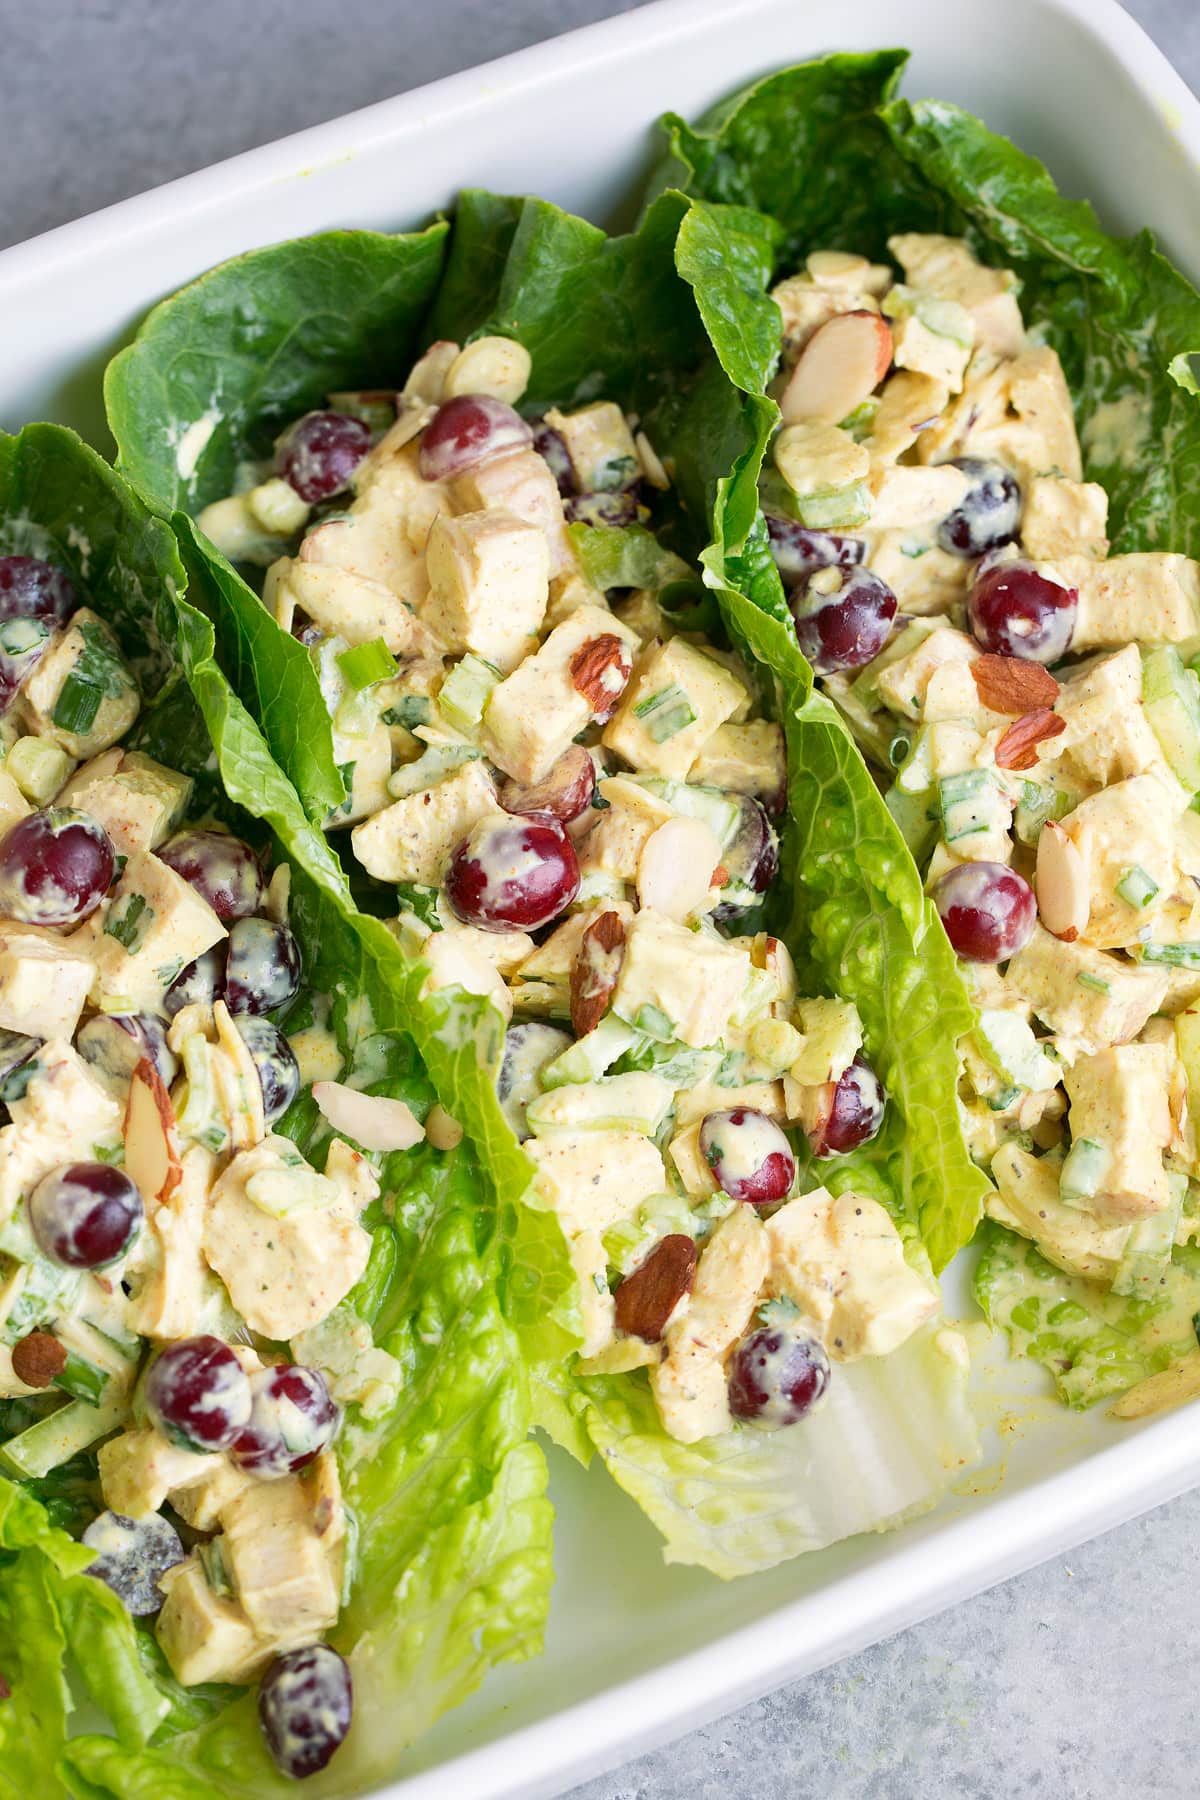 Curry Chicken Salad in lettuce leaves